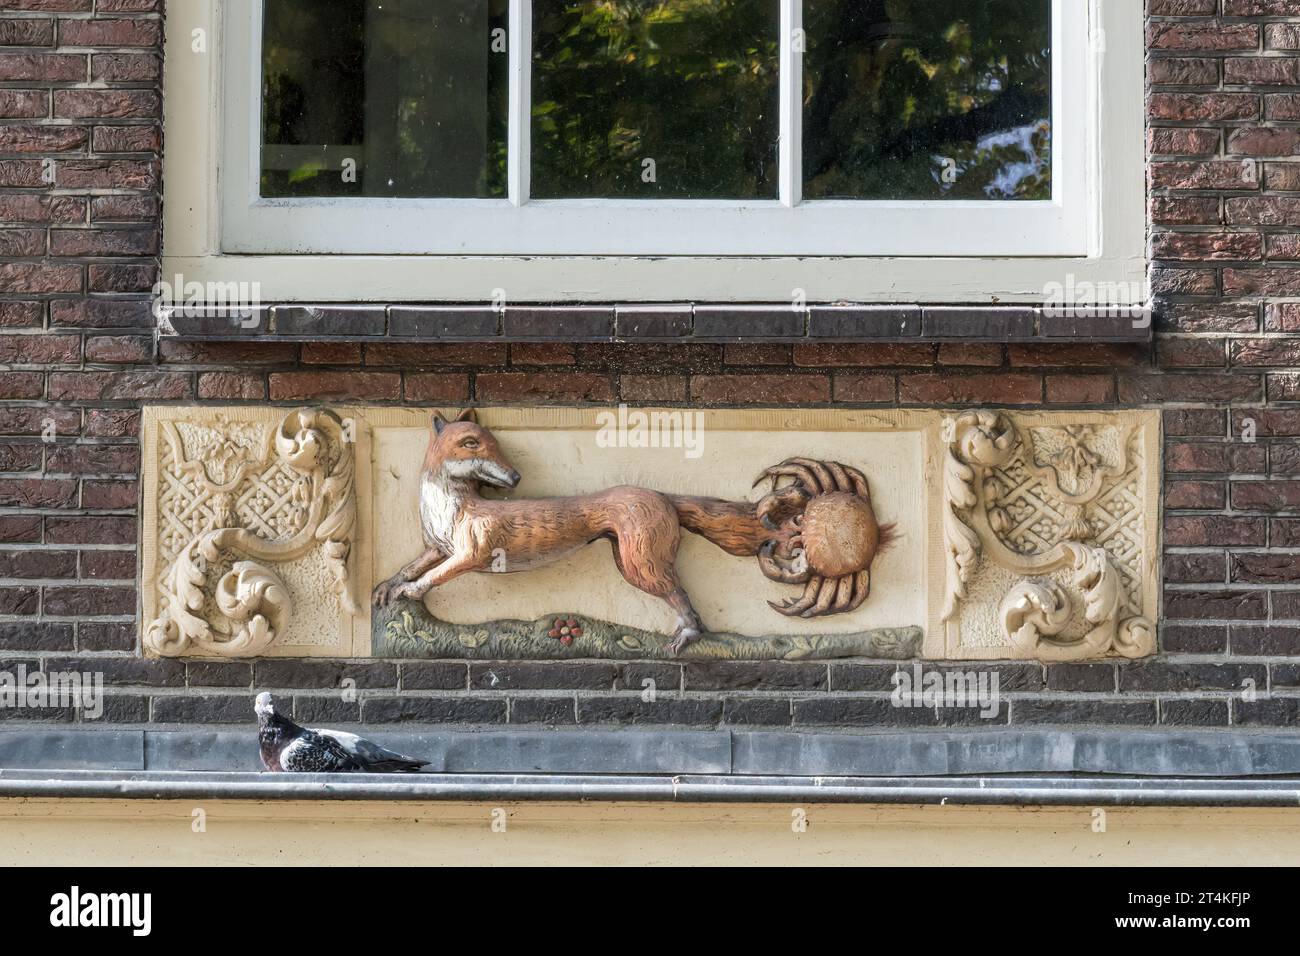 The fox  & crab gable stone on a building in Noordermarkt, Amsterdam, references the Aesops fable. Stock Photo